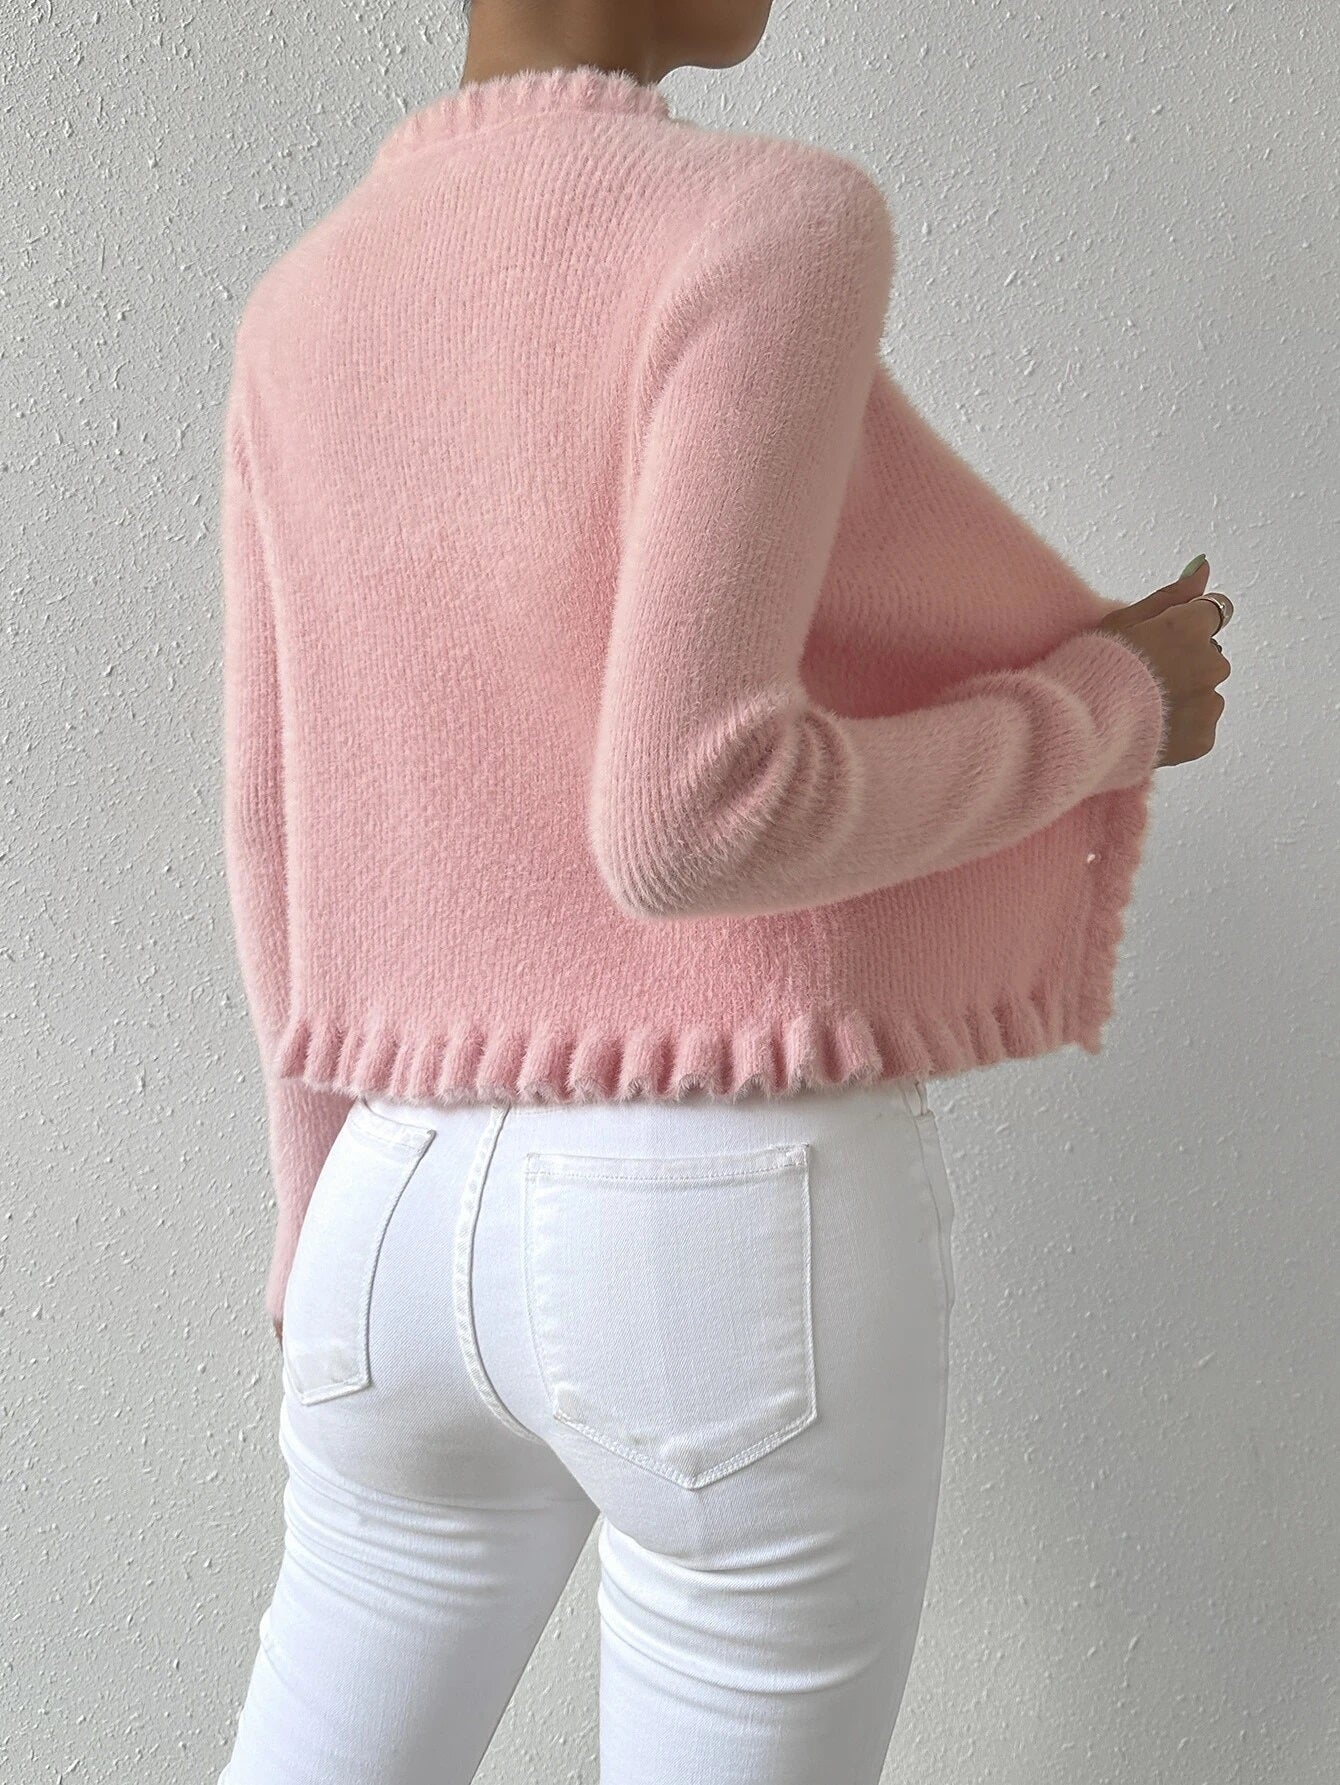 CM-CS713218 Women Casual Seoul Style Frill Trim Open Front Cardigan - Baby Pink